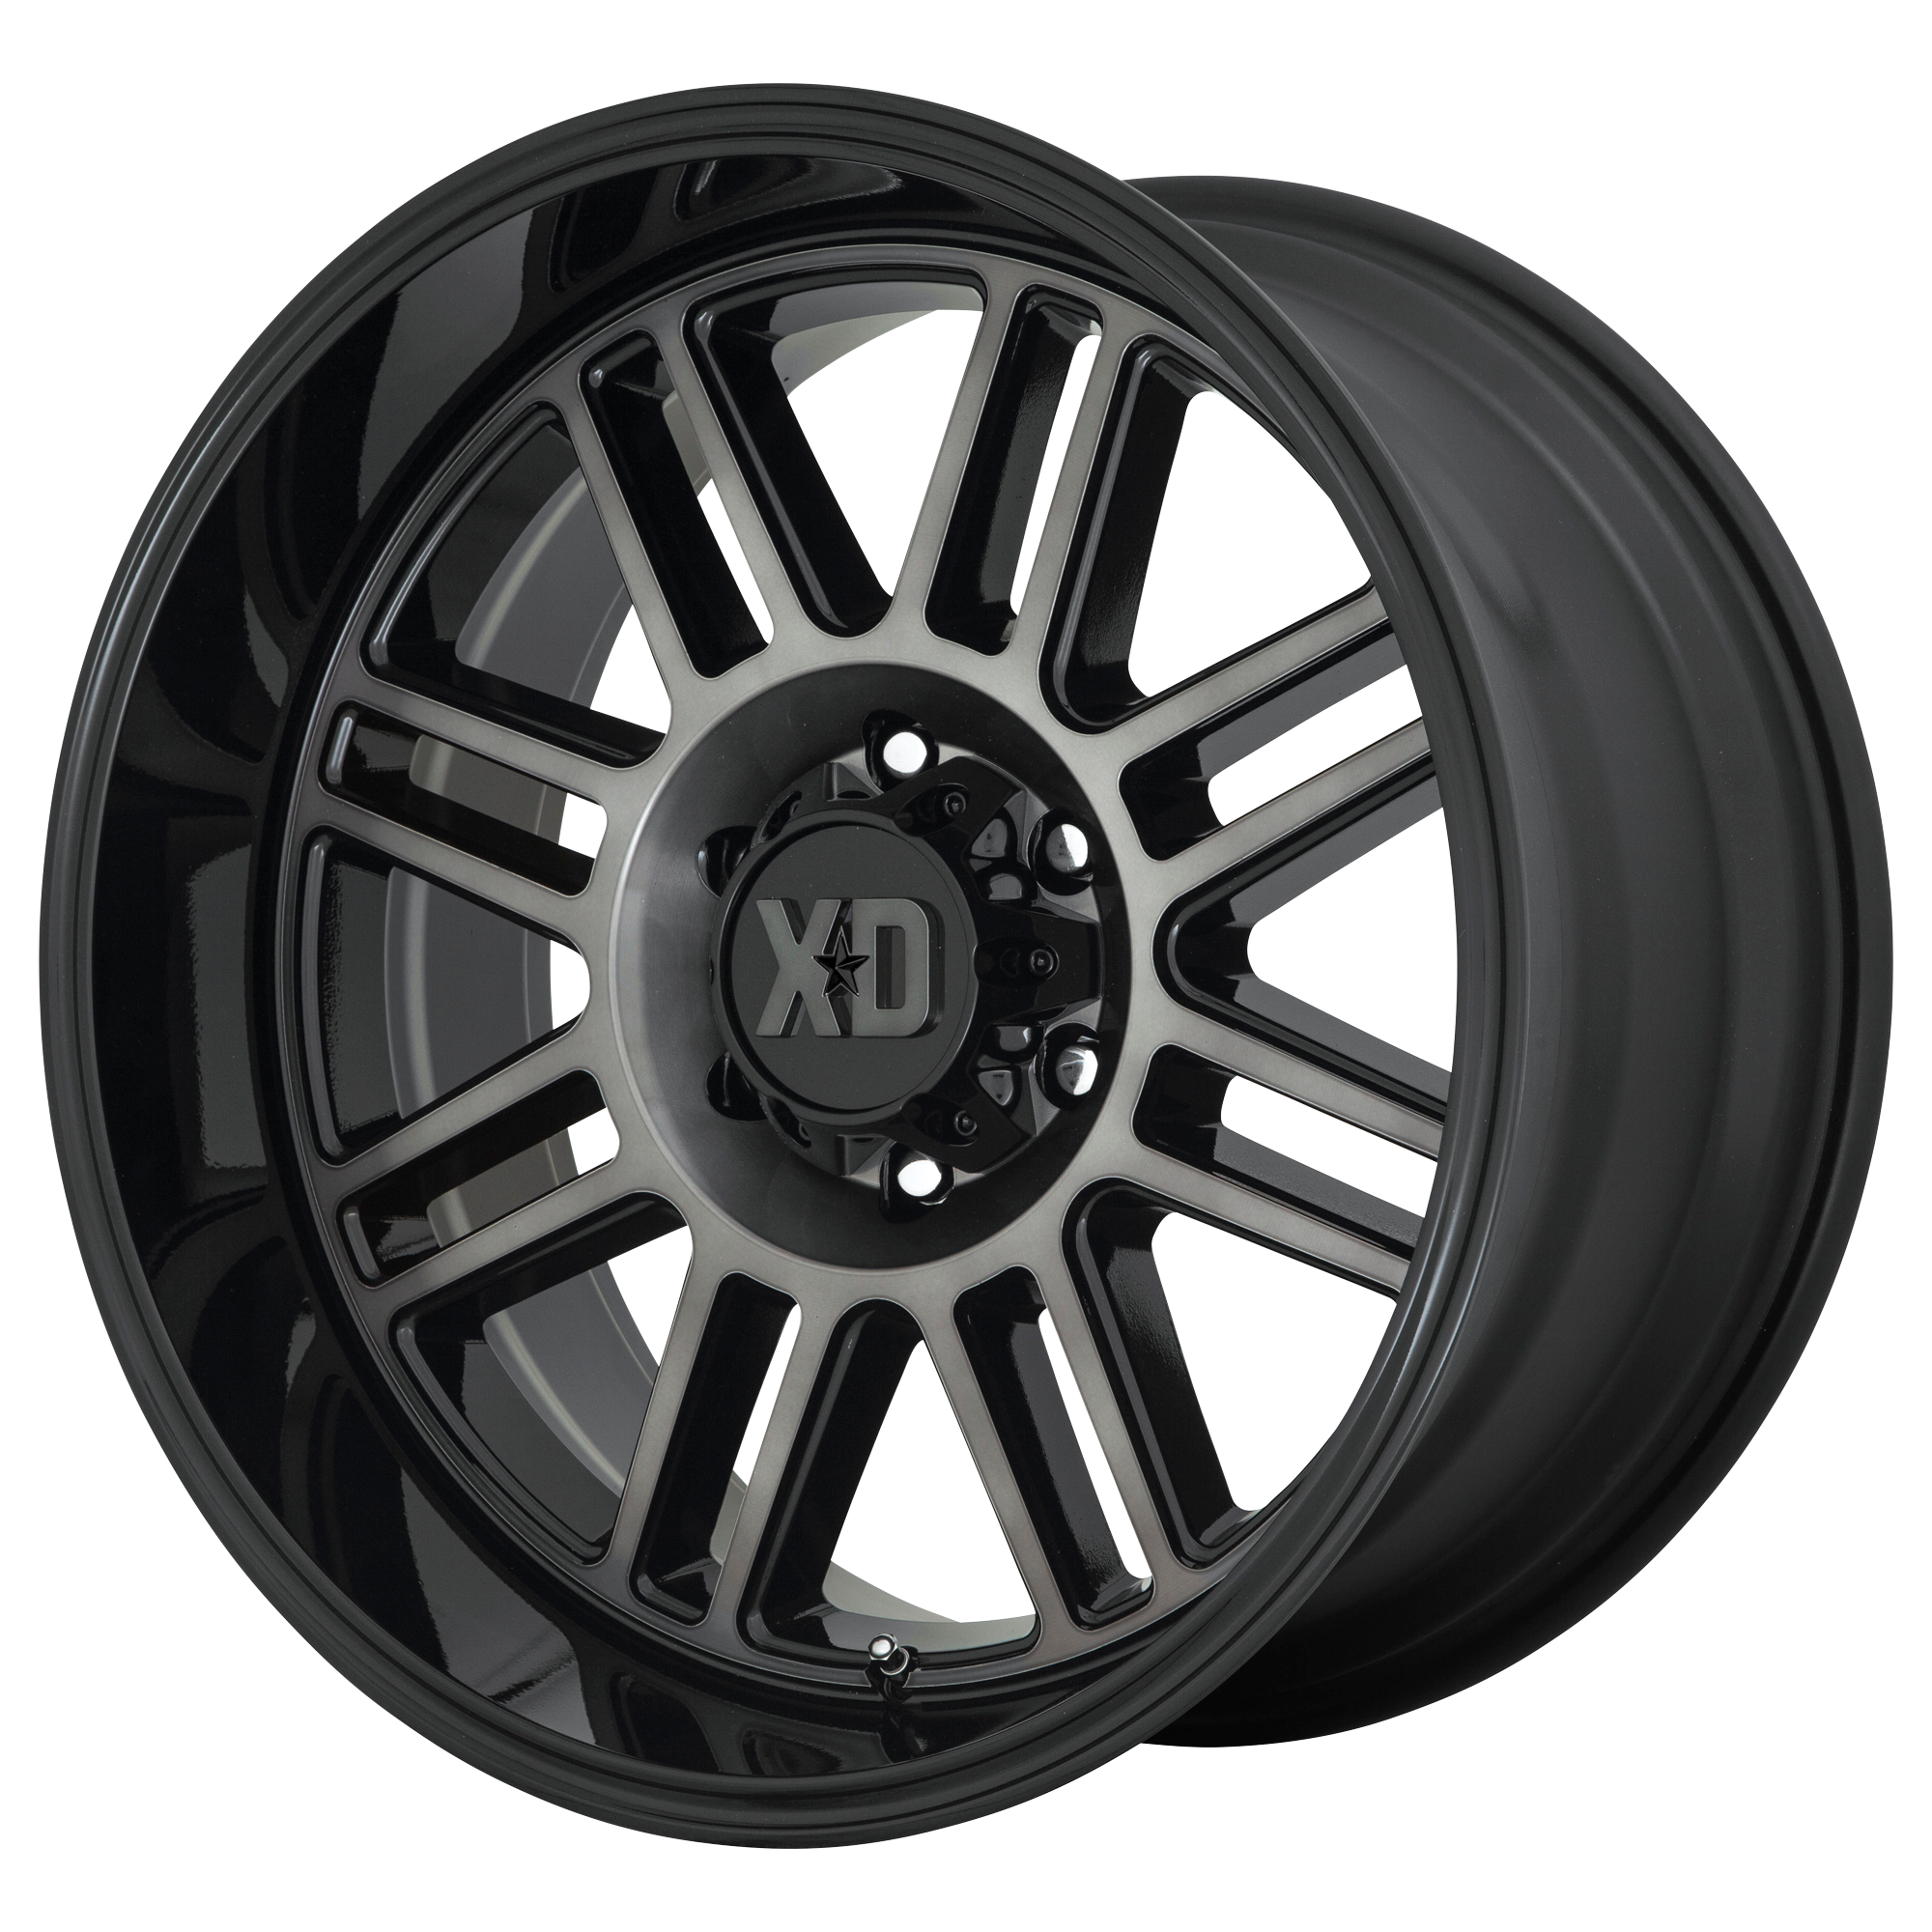 CAGE 22x10 6x139.70 GLOSS BLACK W/ GRAY TINT (-18 mm) - Tires and Engine Performance